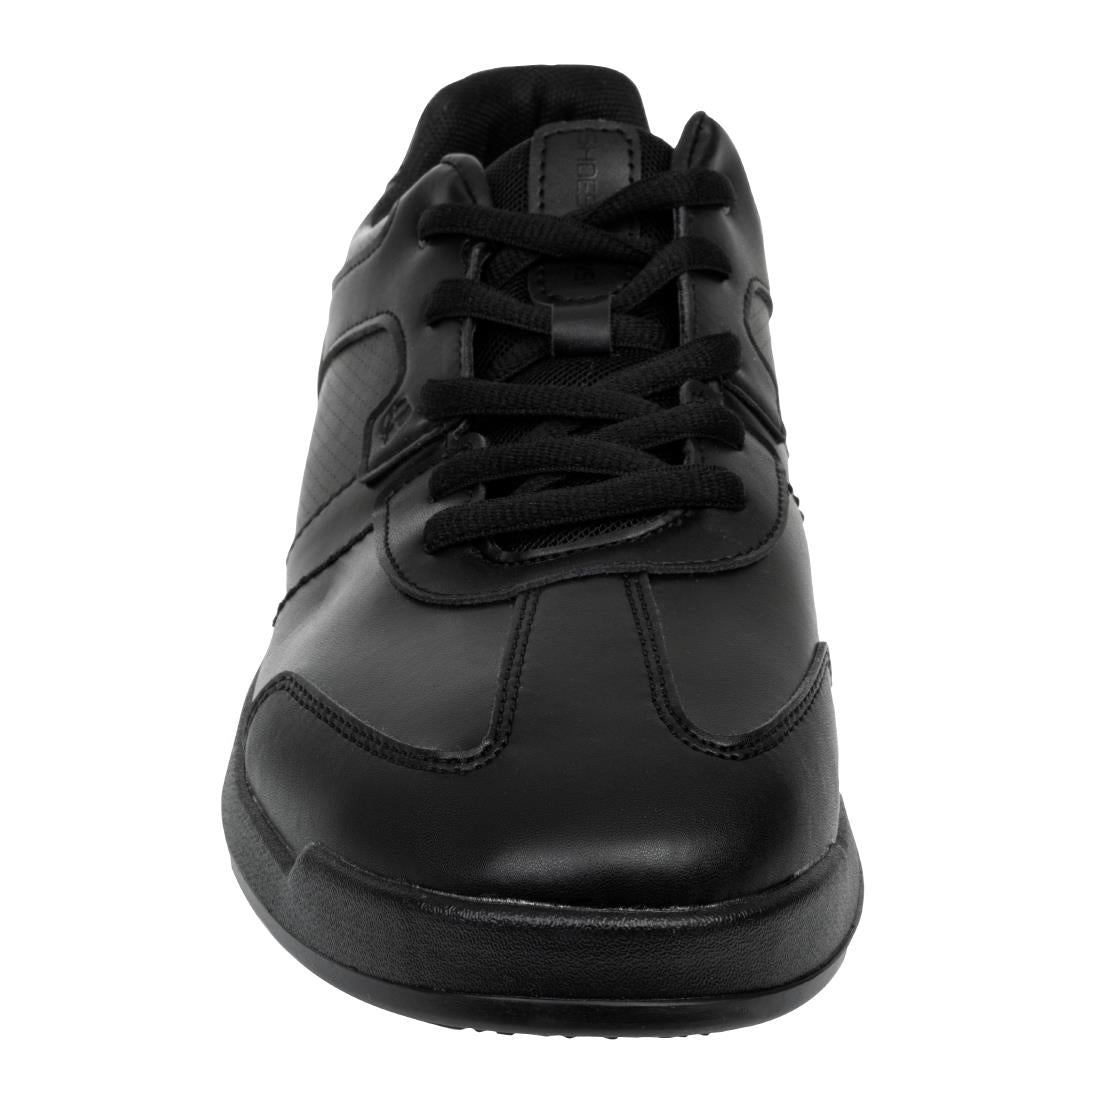 BB585-42 Shoes for Crews Freestyle Trainers Black Size 42